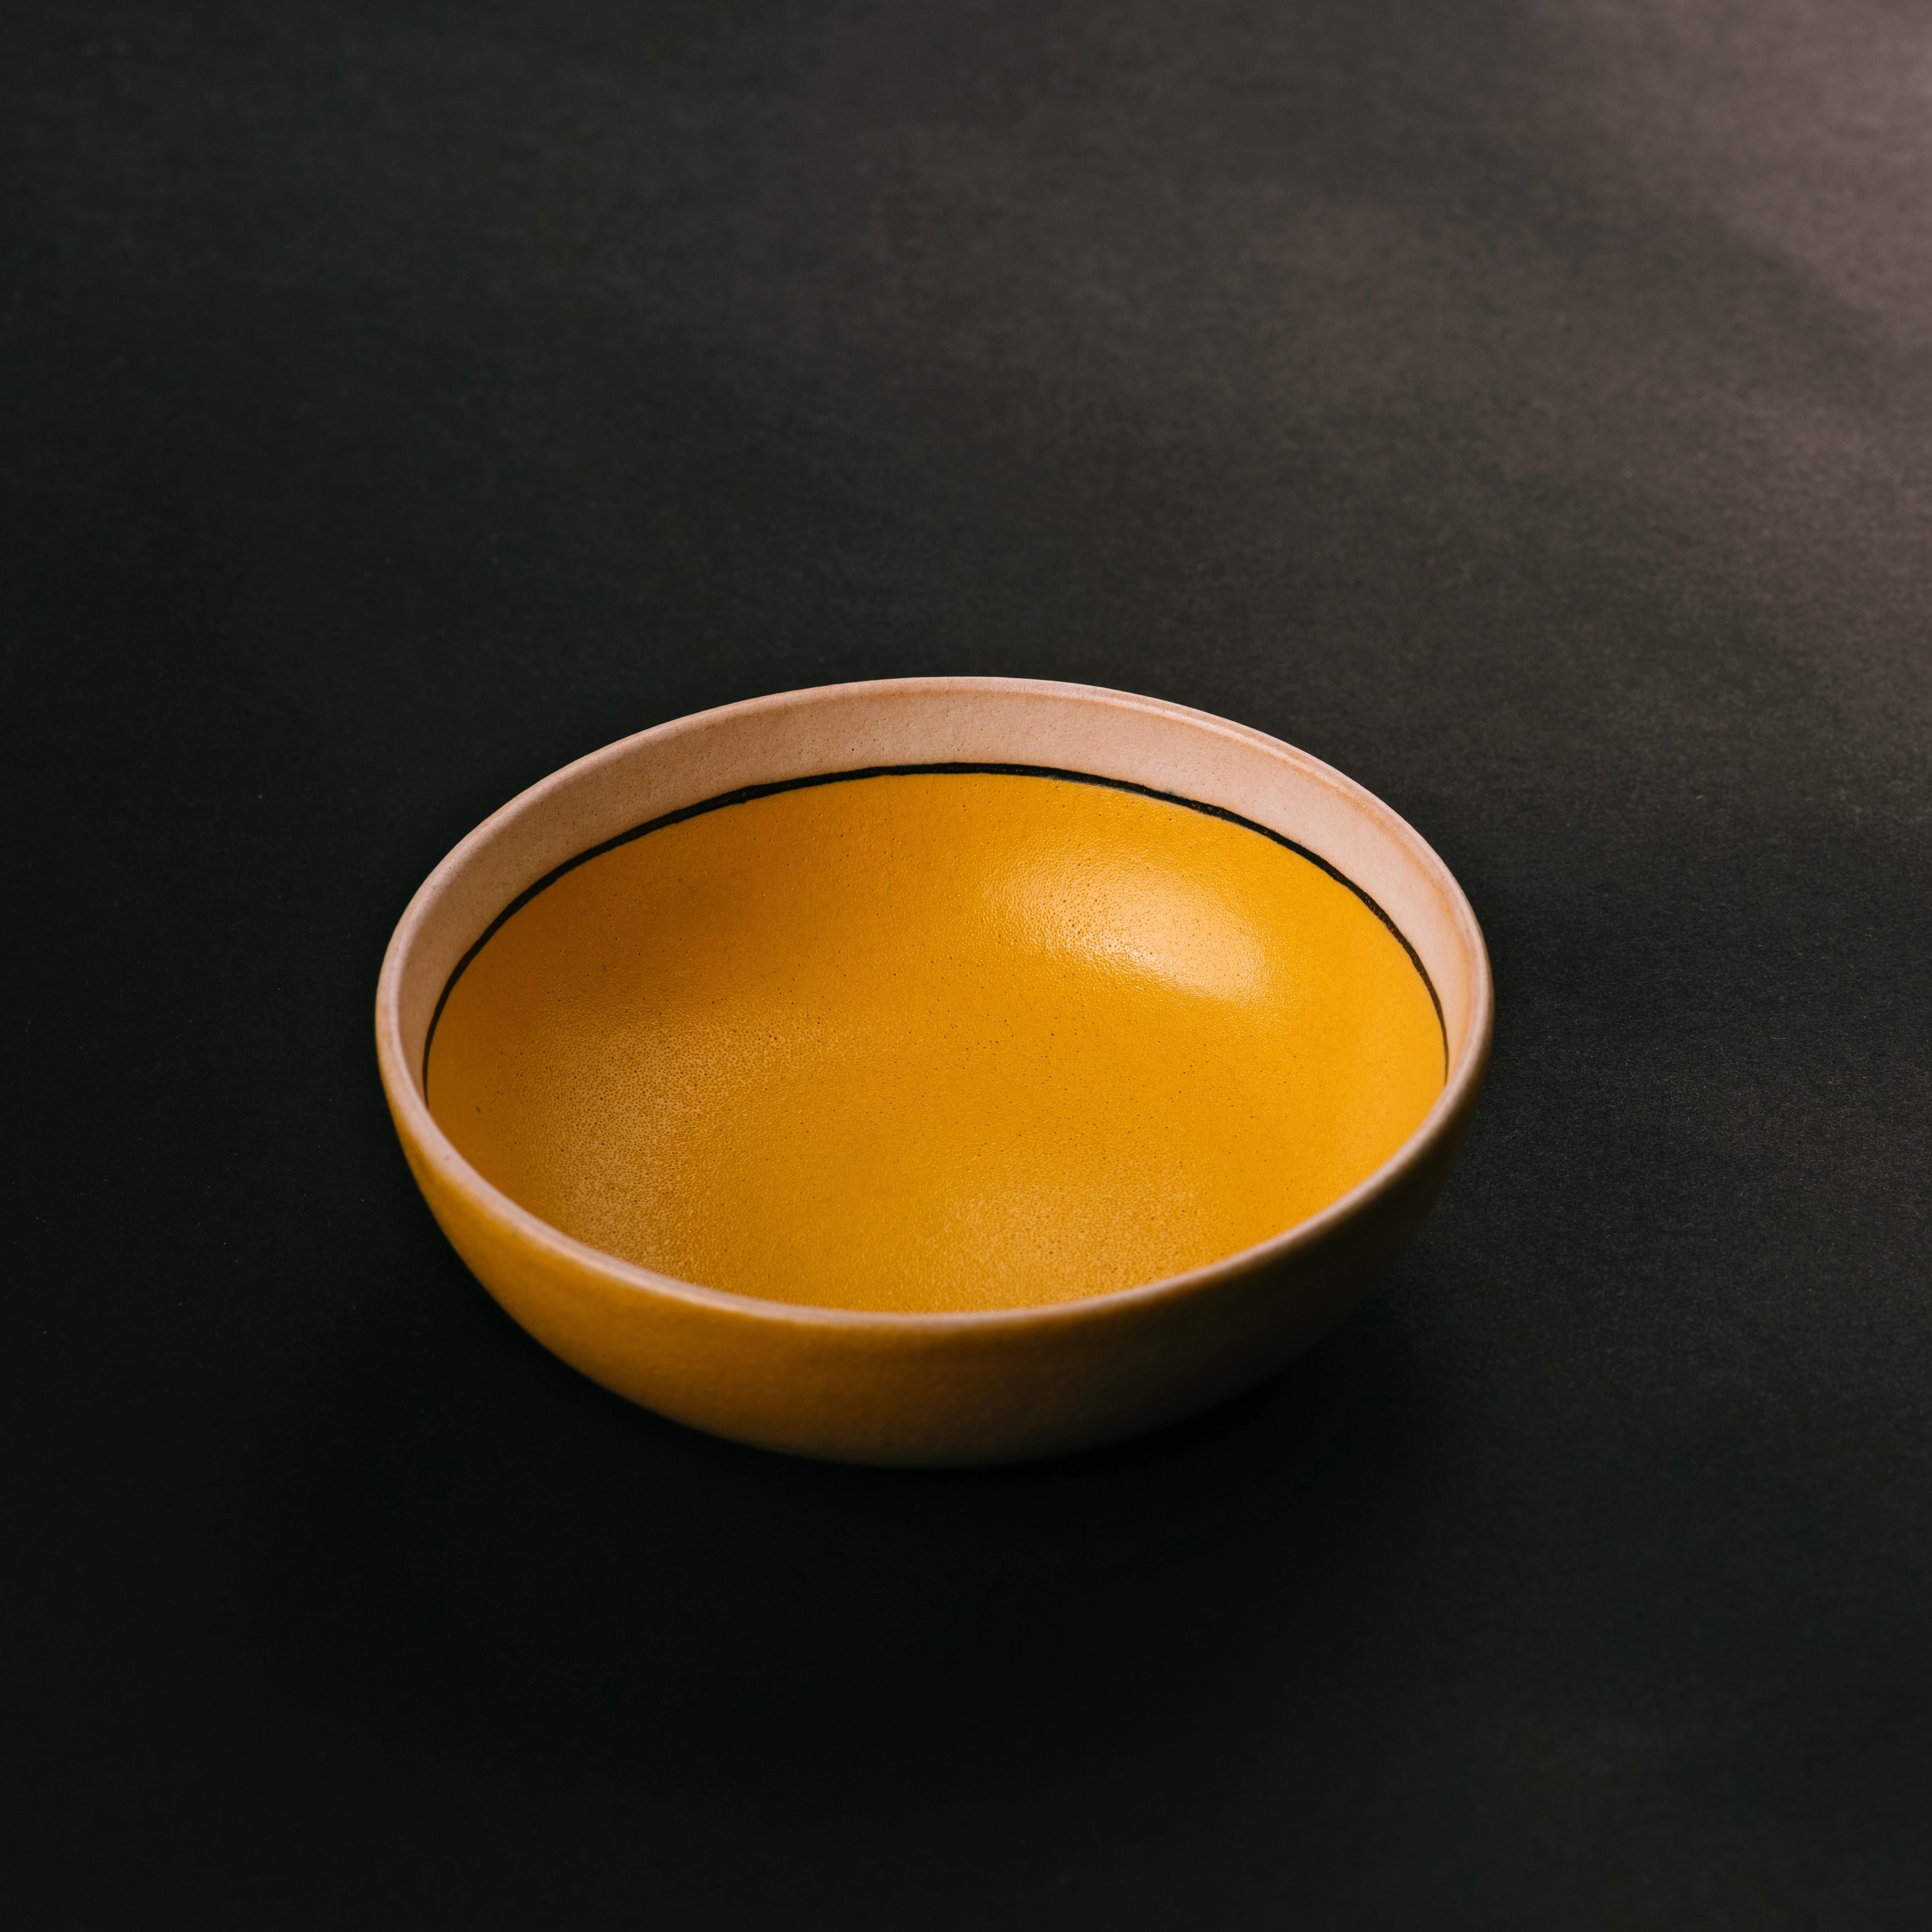 Arts and Crafts movement, petite ceramic bowl by Fannie Levine for Saturday Evening Girls. This early modernist design was created using the cuerda seca technique, its soft white and yellow glazes separated by a thin black border. Signed and dated